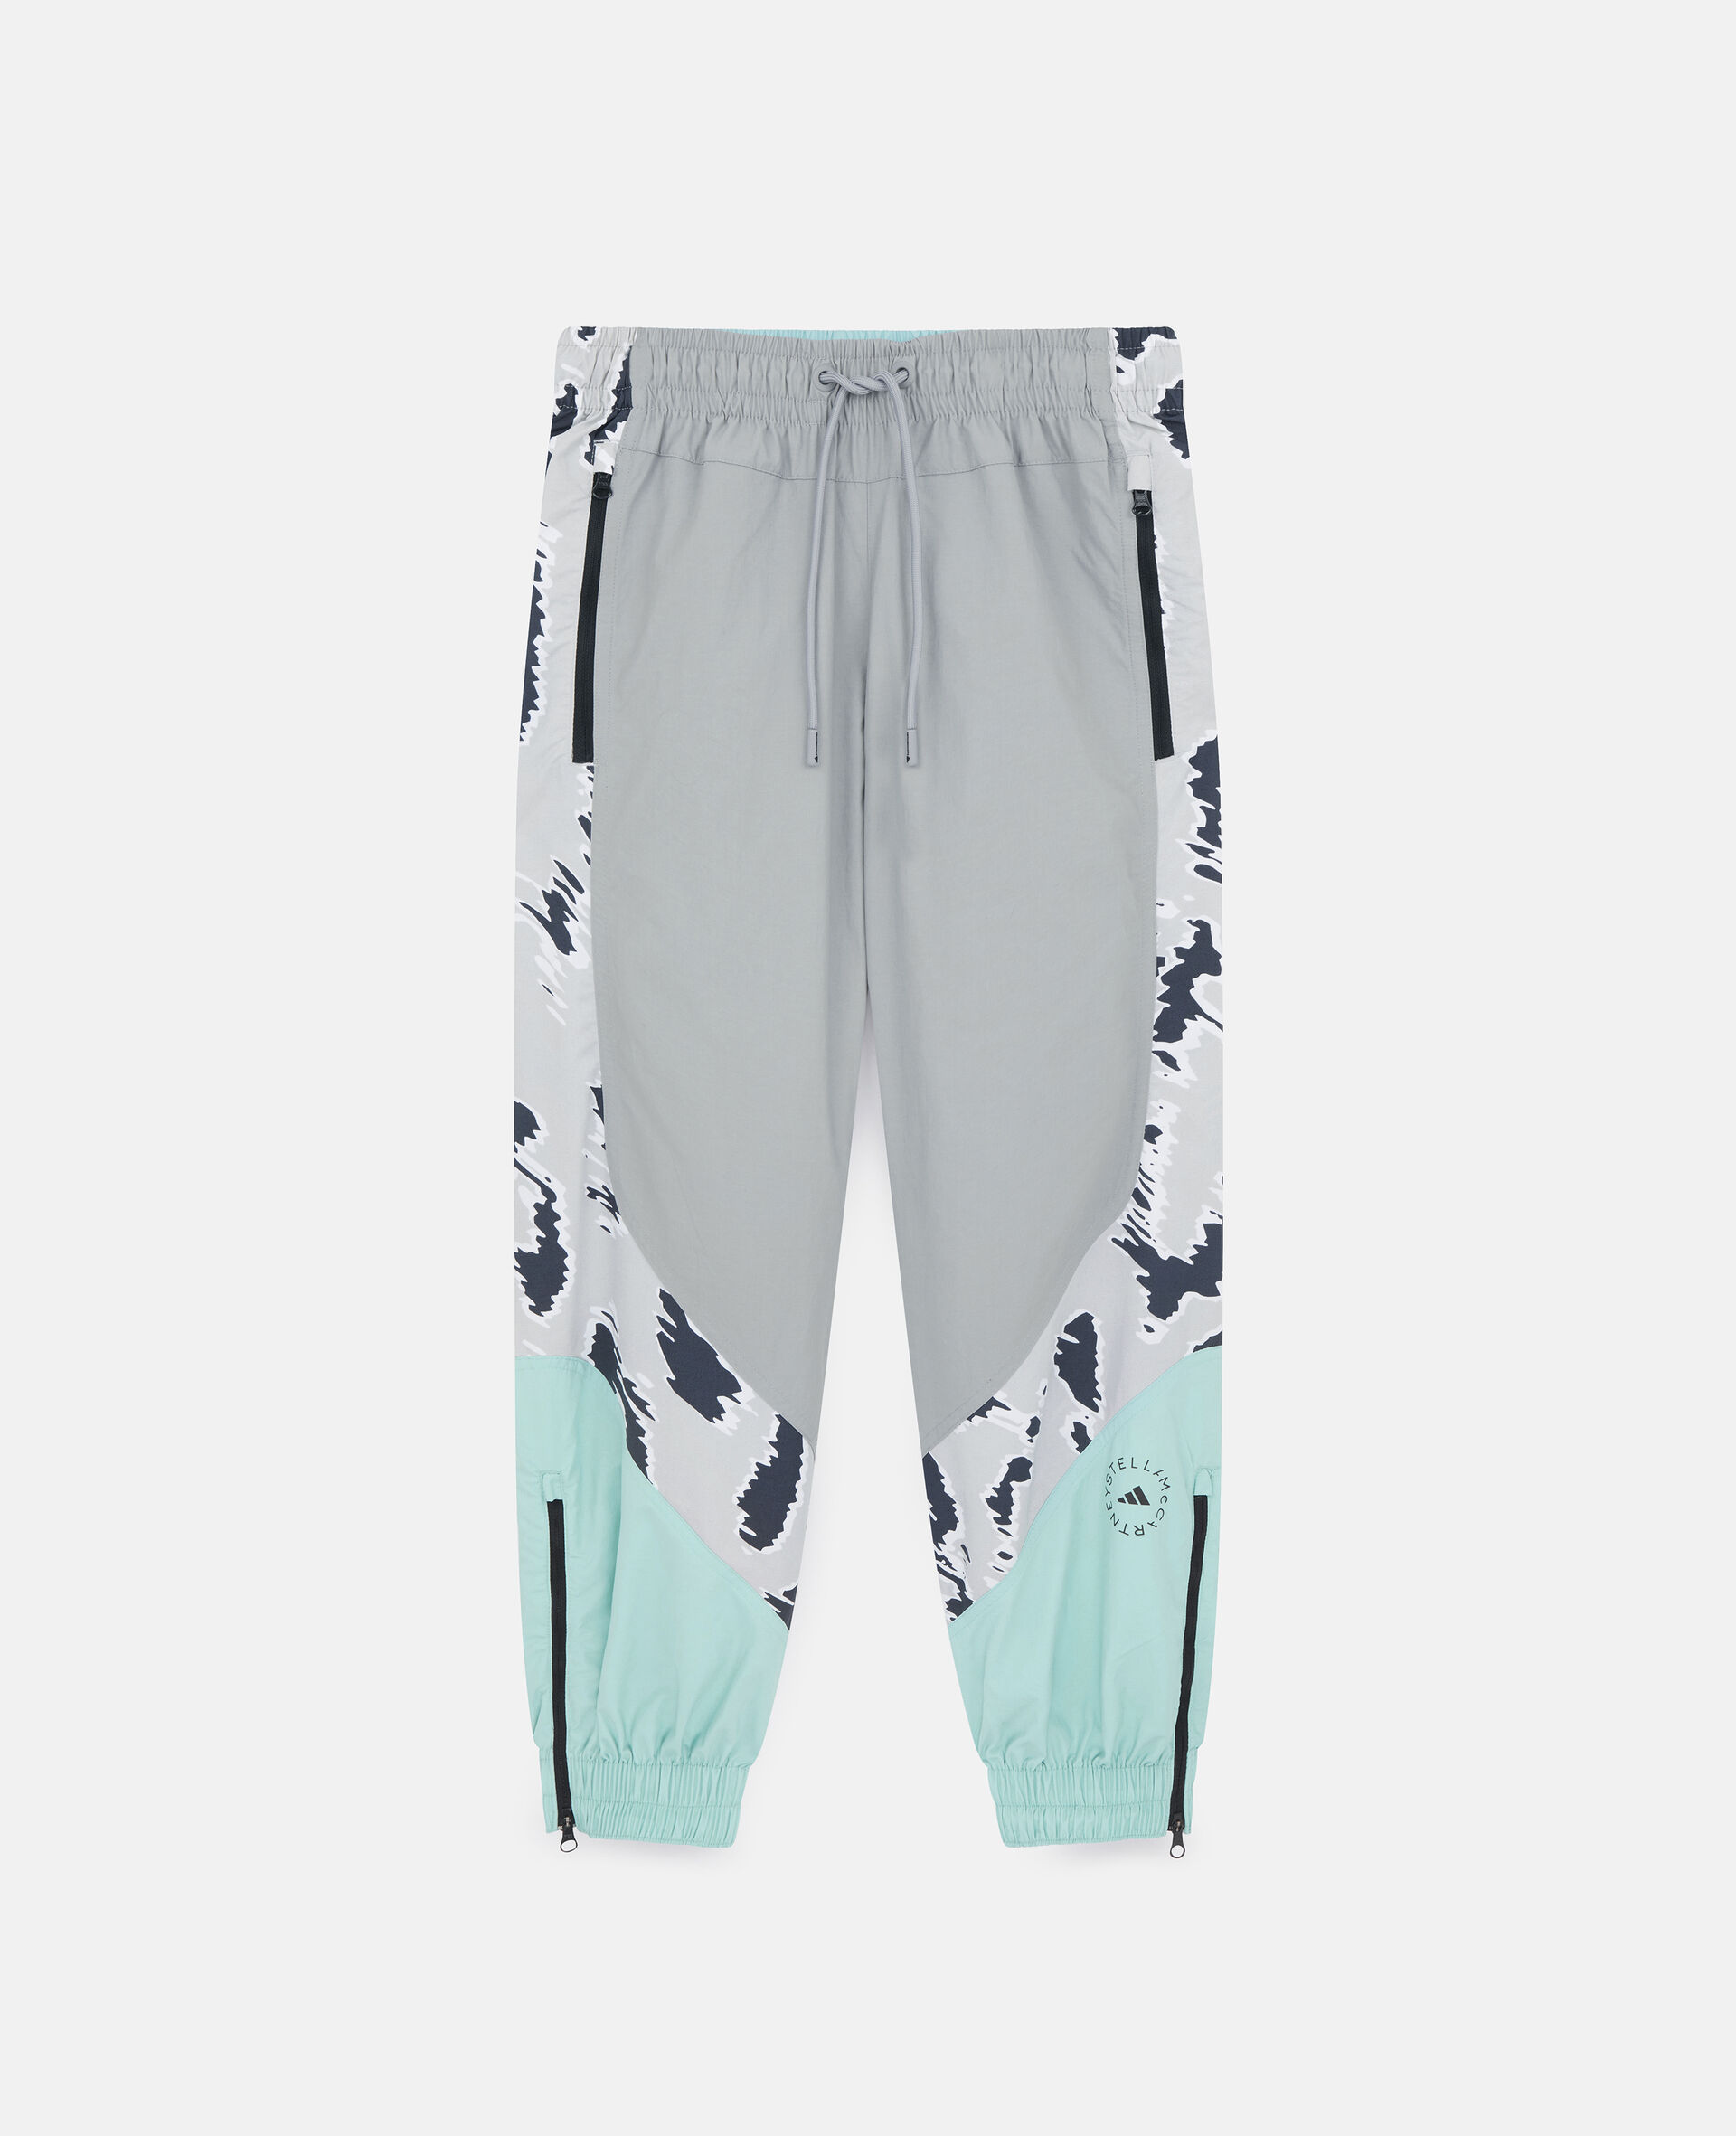 Animal Print Woven Track Pants  -Multicolour-large image number 0